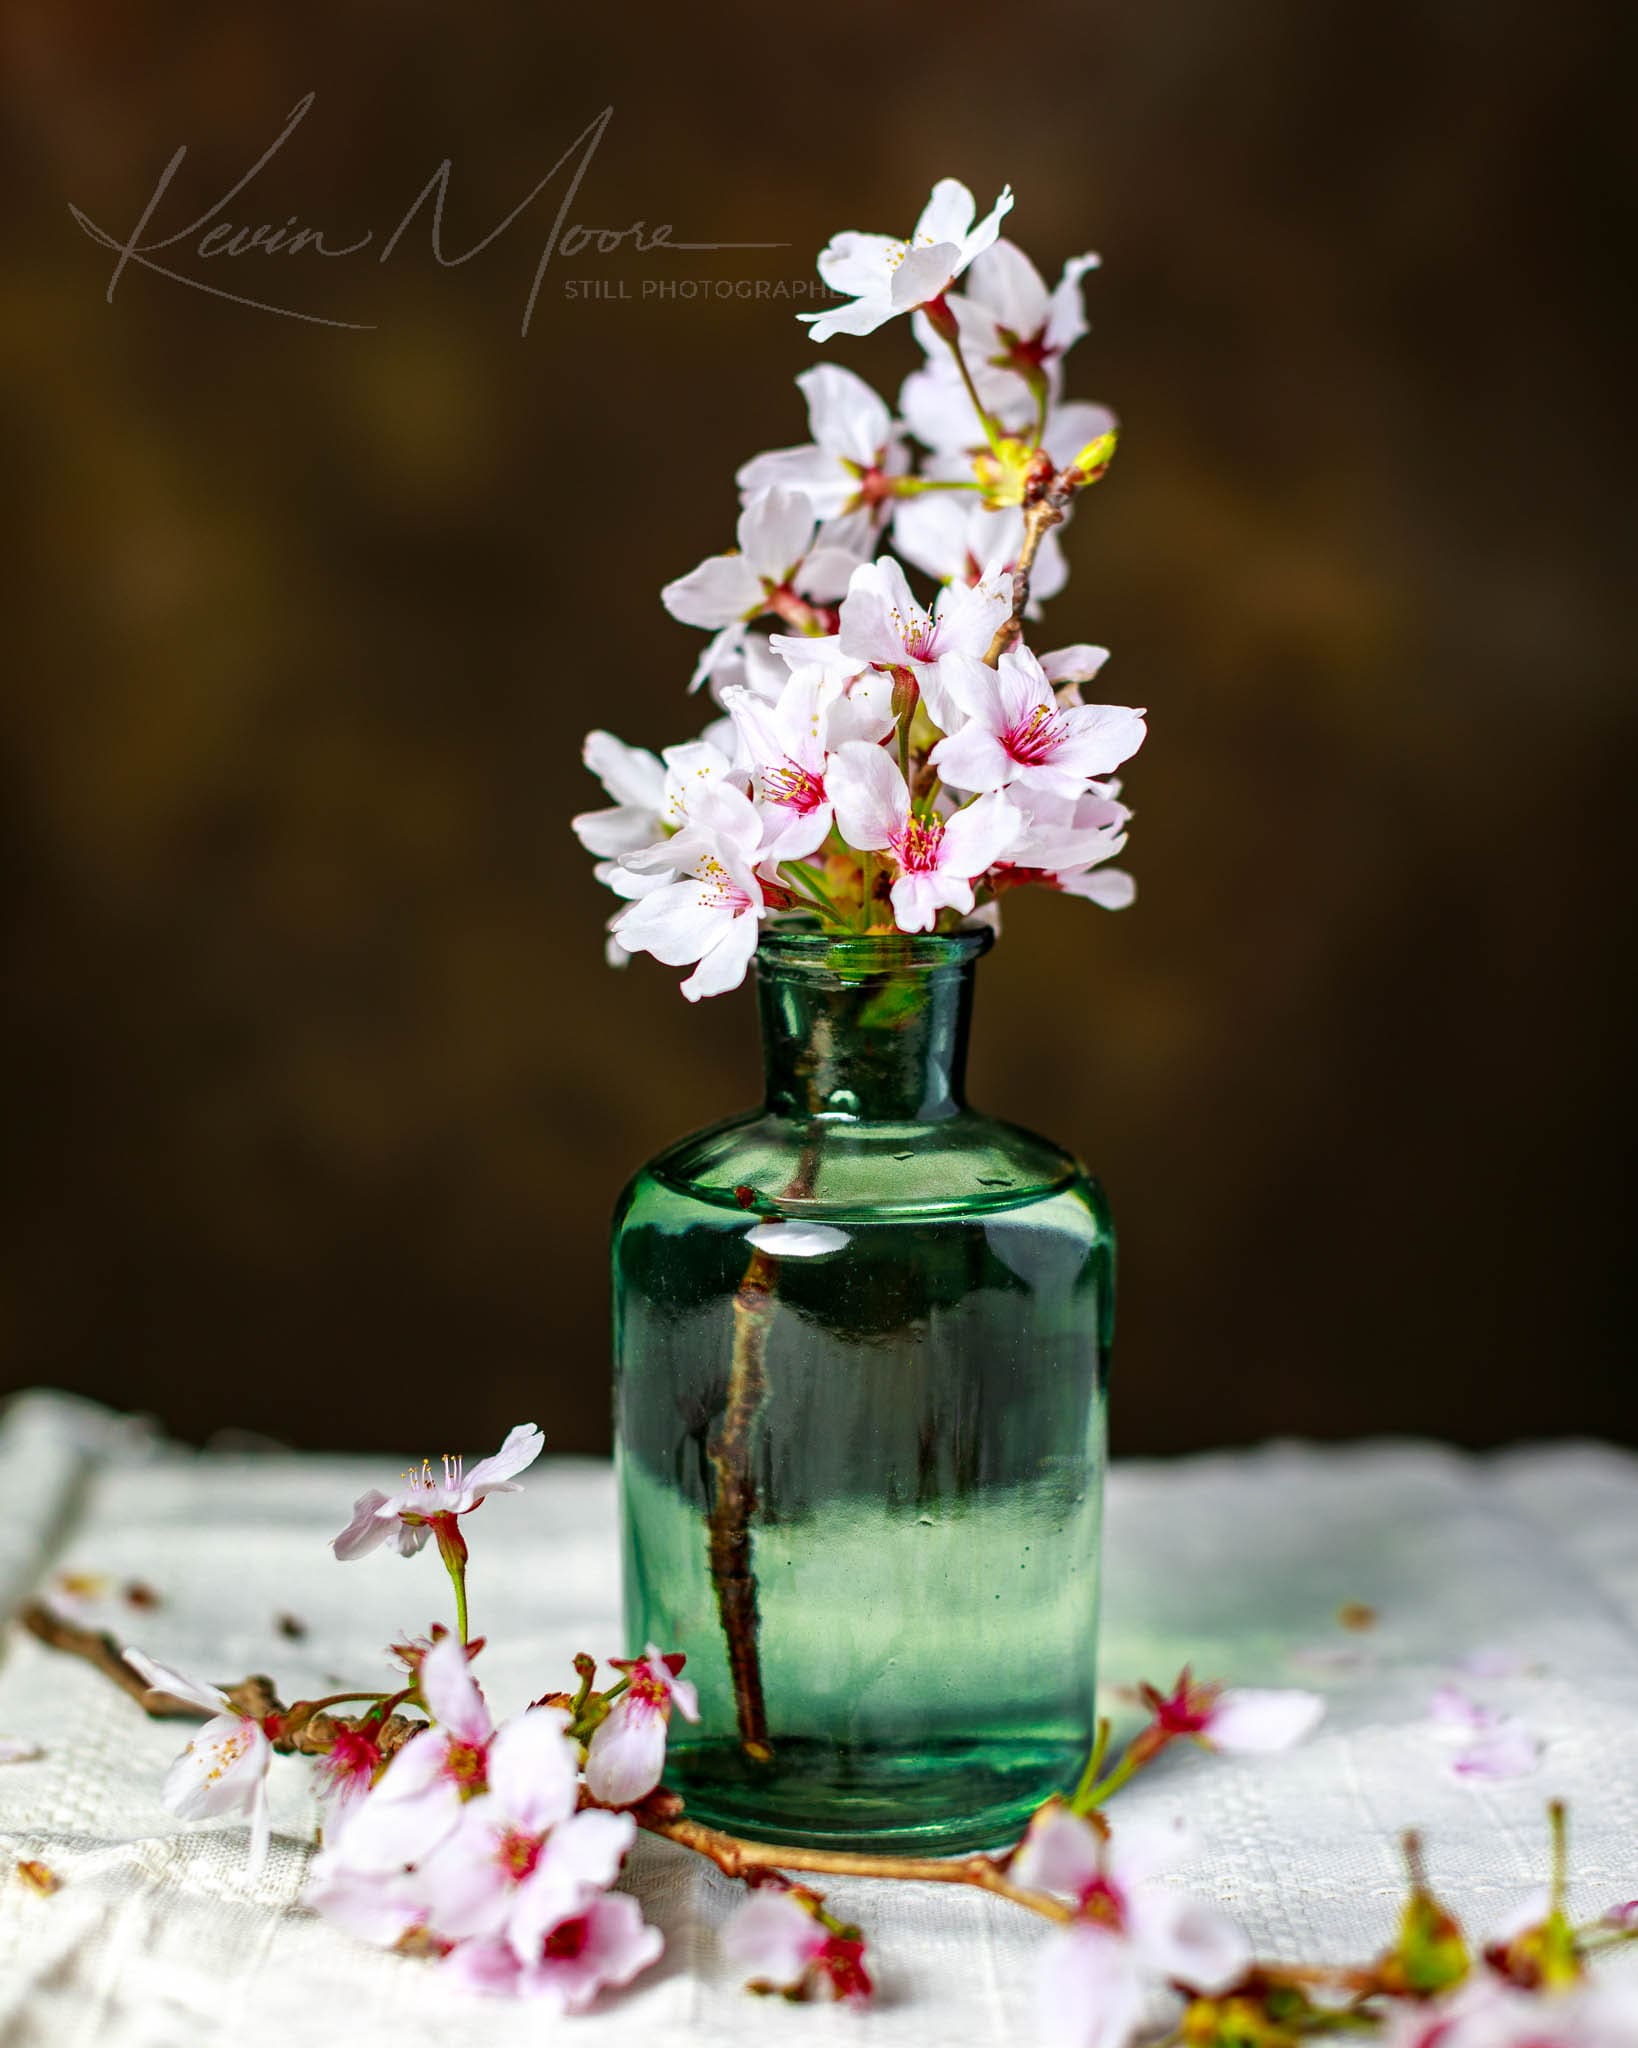 Vintage green glass bottle with delicate cherry blossoms on a white lace backdrop.